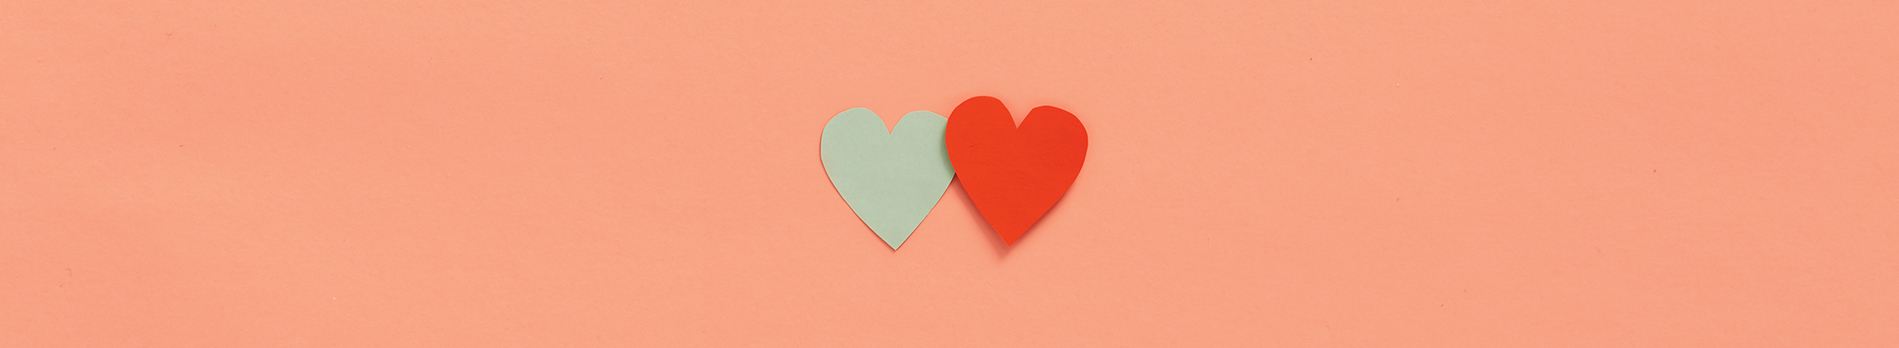 A mint-colored heart and a red heart on a peach colored background